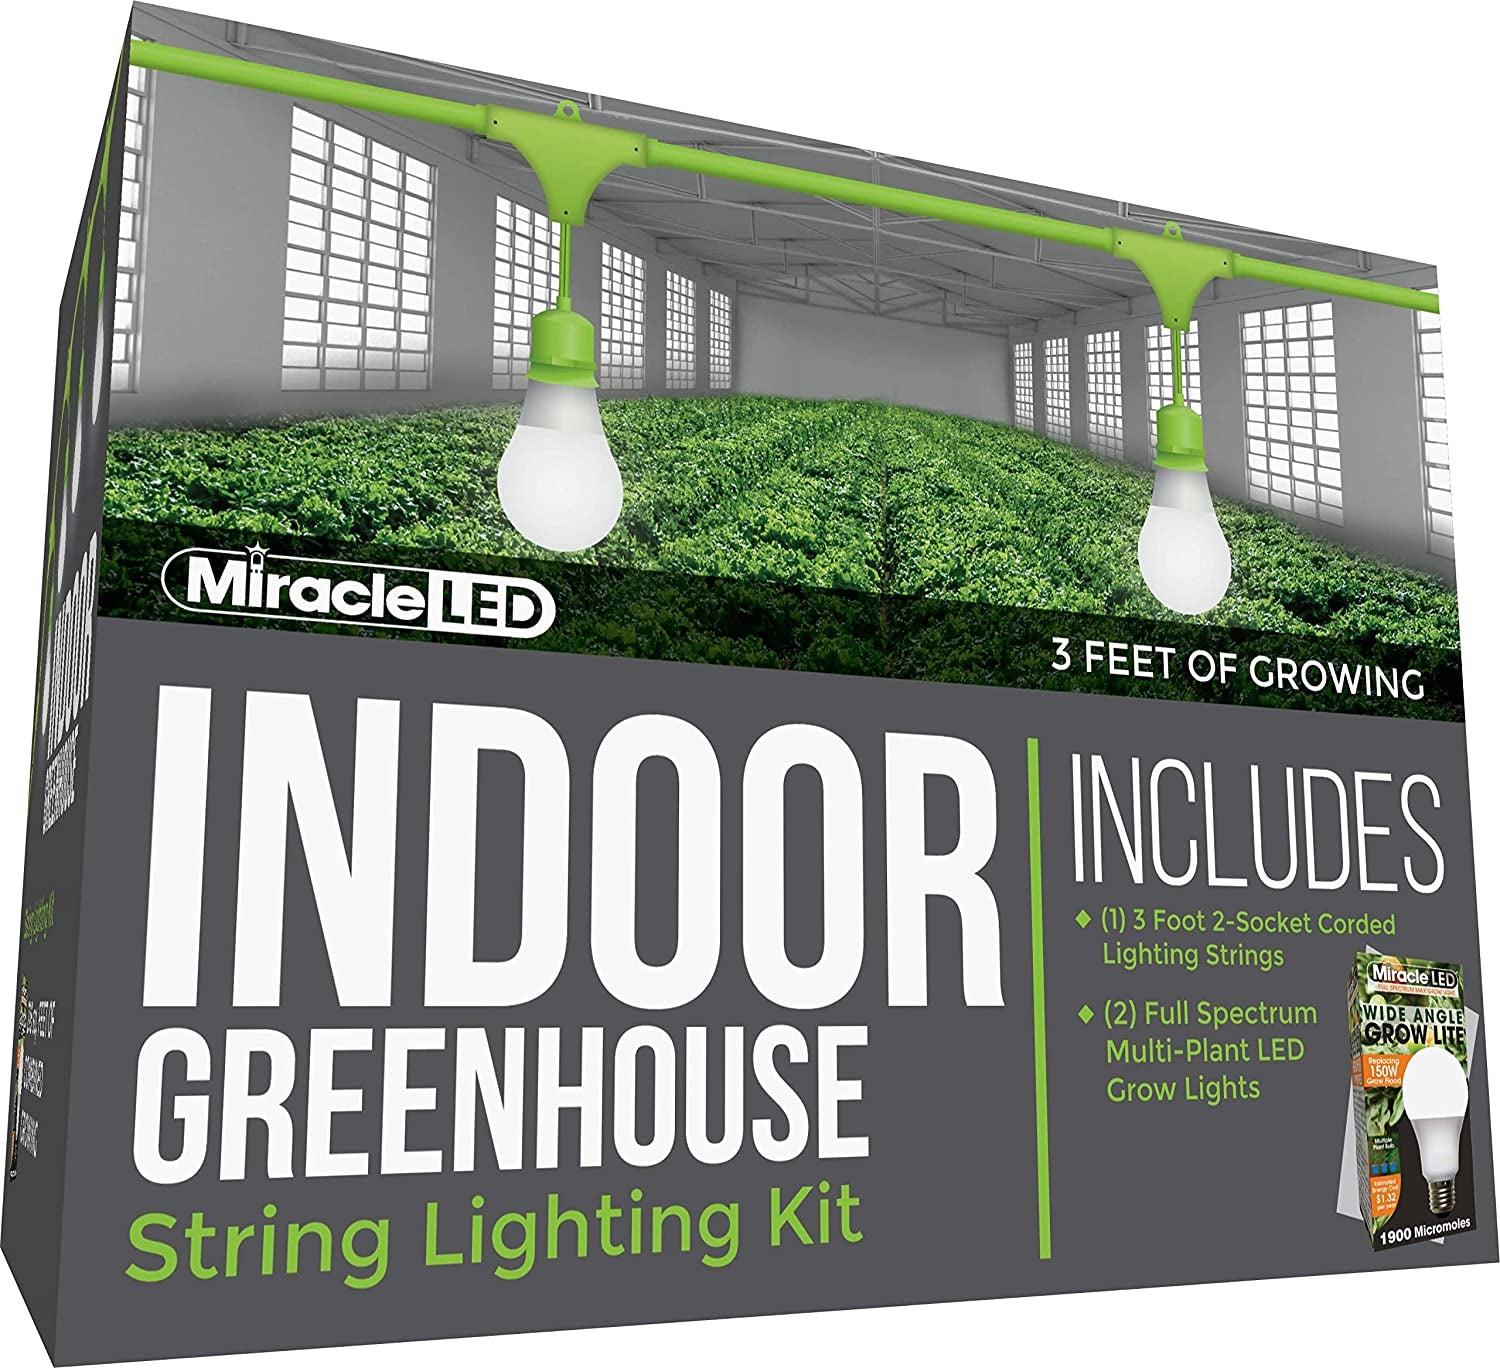 Miracle LED Indoor Greenhouse Corded Lighting Kit Add-On 3-Foot 2-Socket with Two Full Spectrum Wide Angle Grow Lights